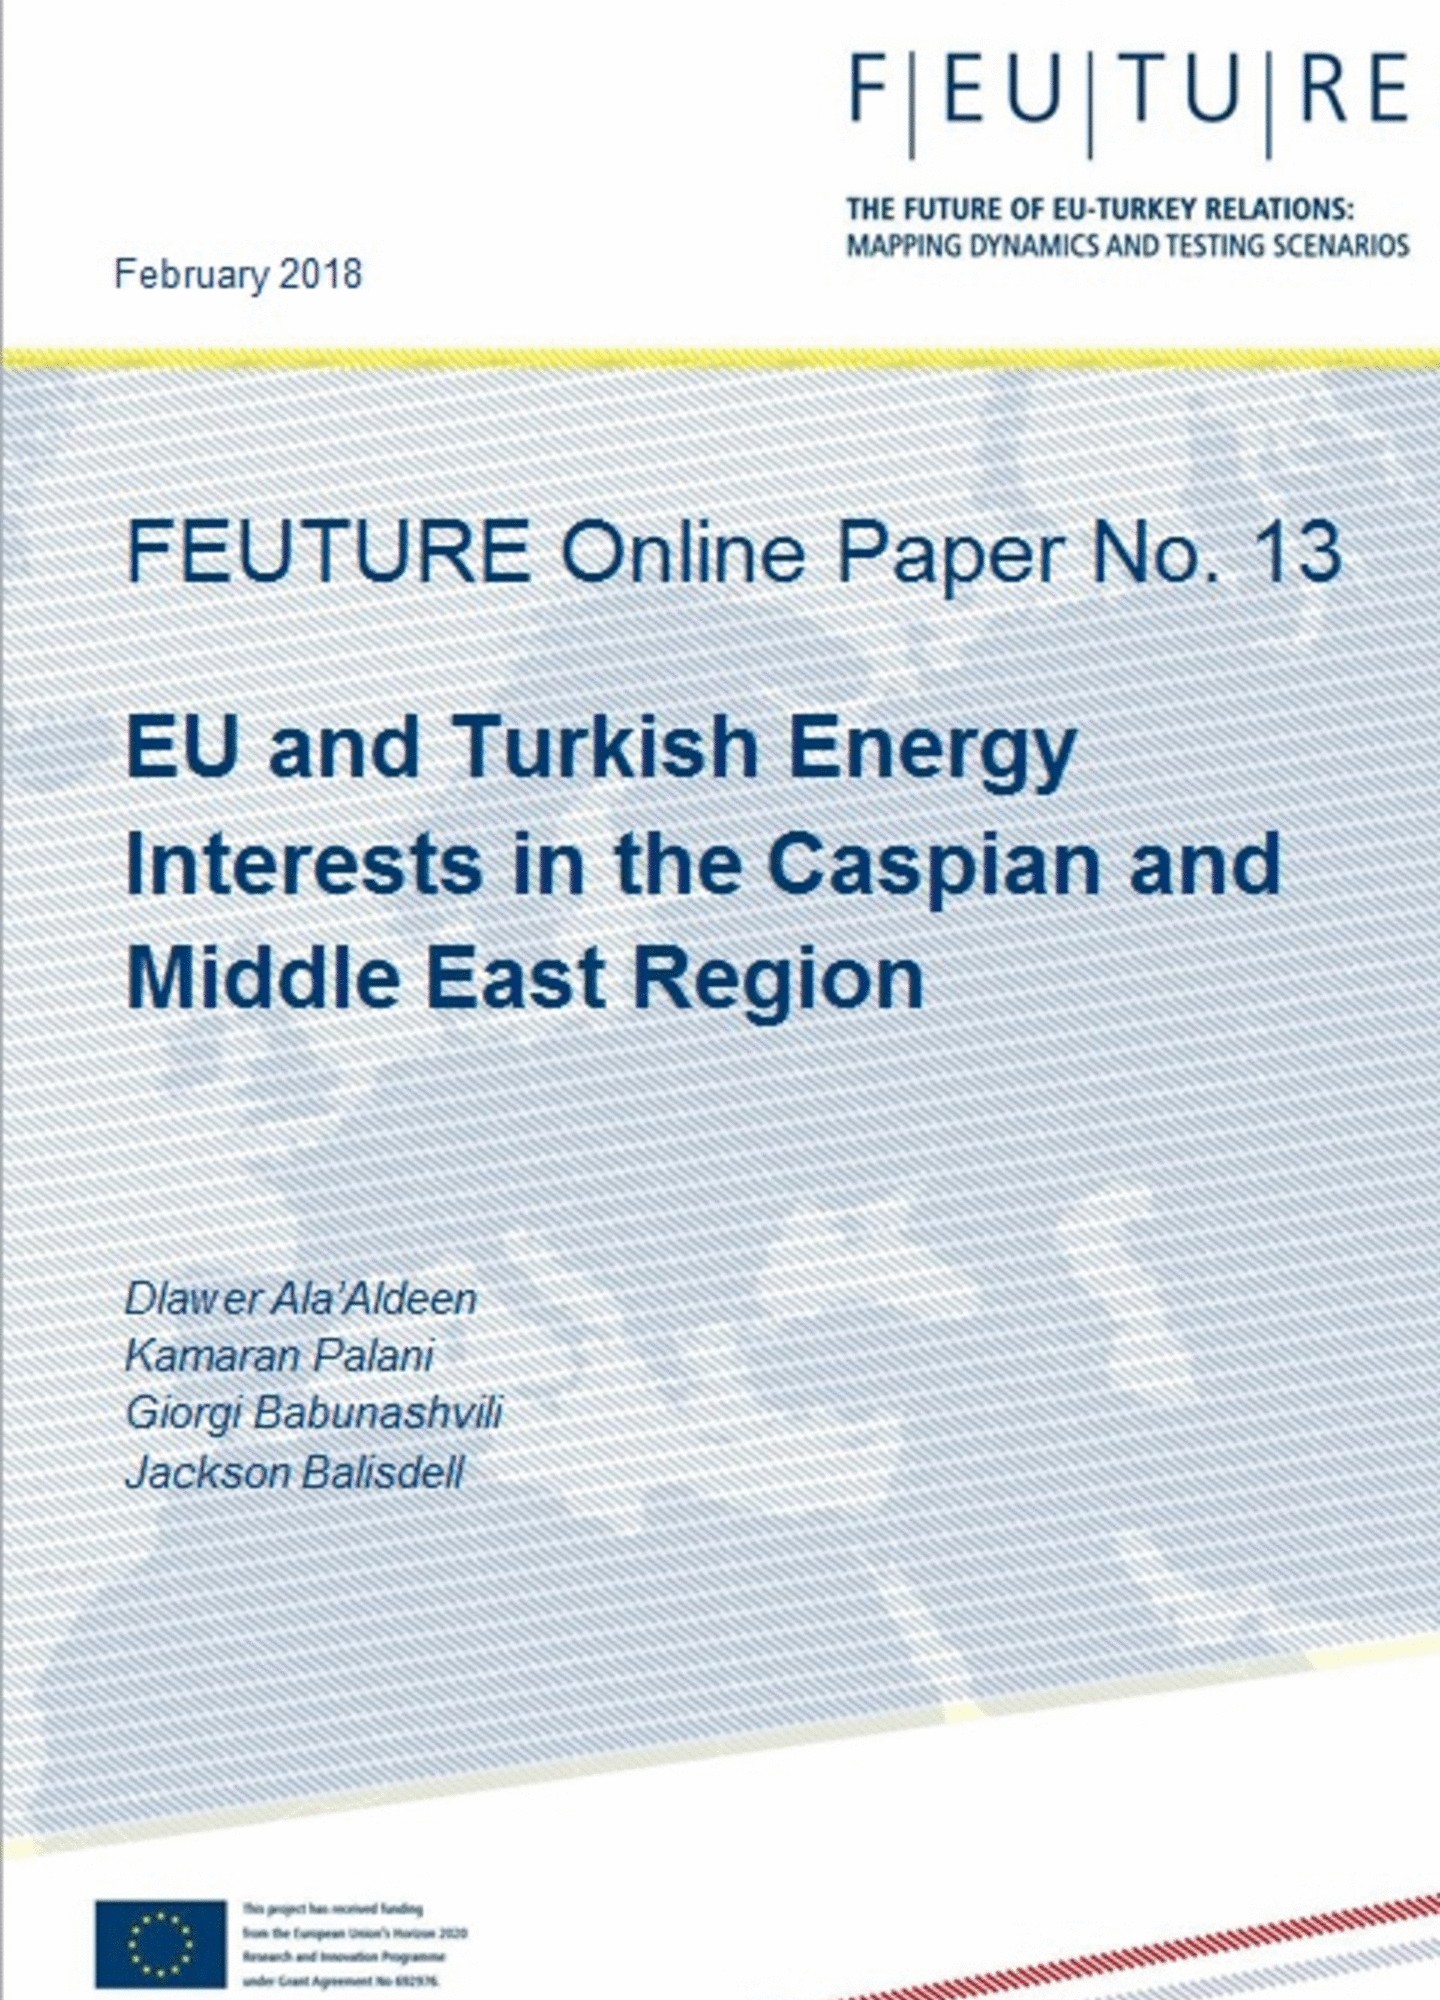 EU and Turkish Energy Interests in the Caspian and Middle East Region